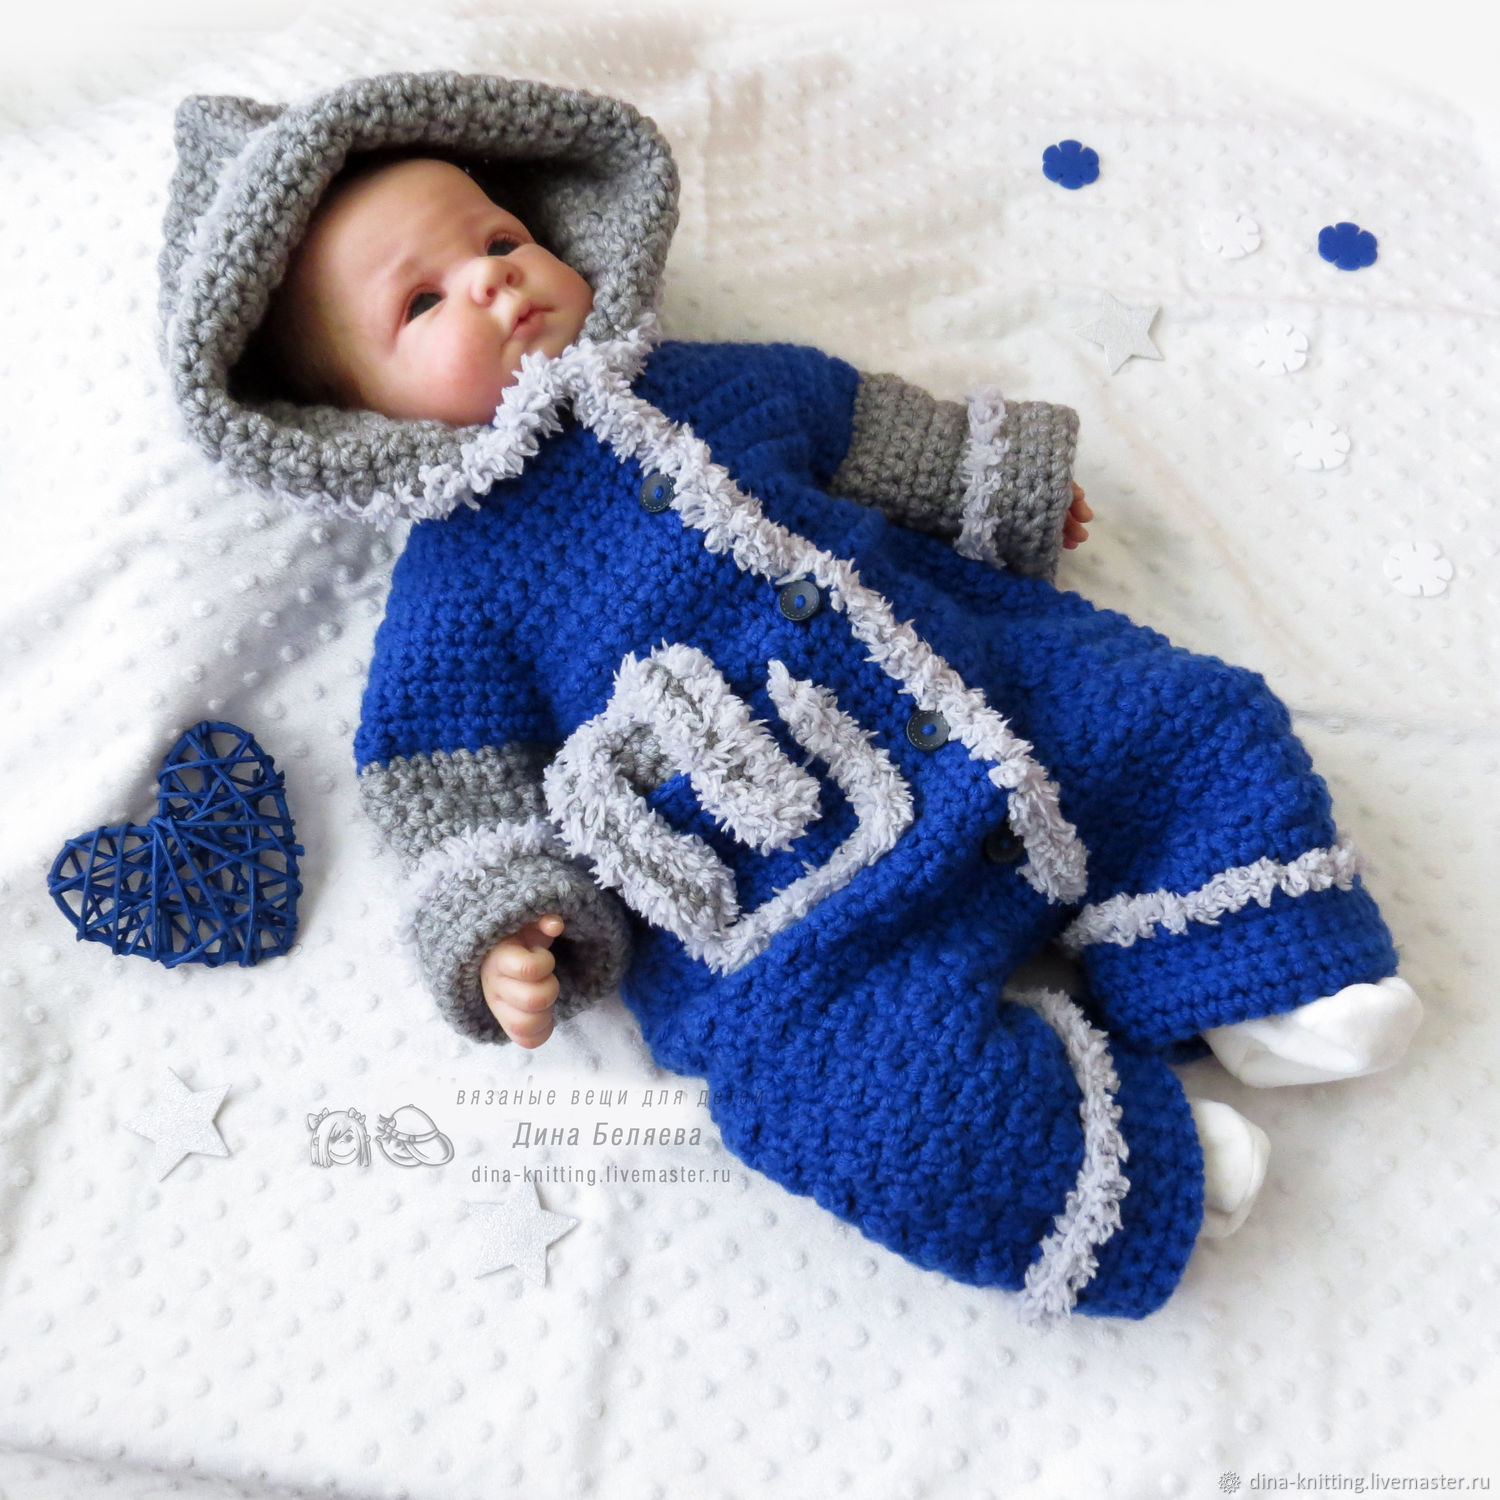 KP322 Boys jacket, hat, shorts and booties baby knitting pattern #322